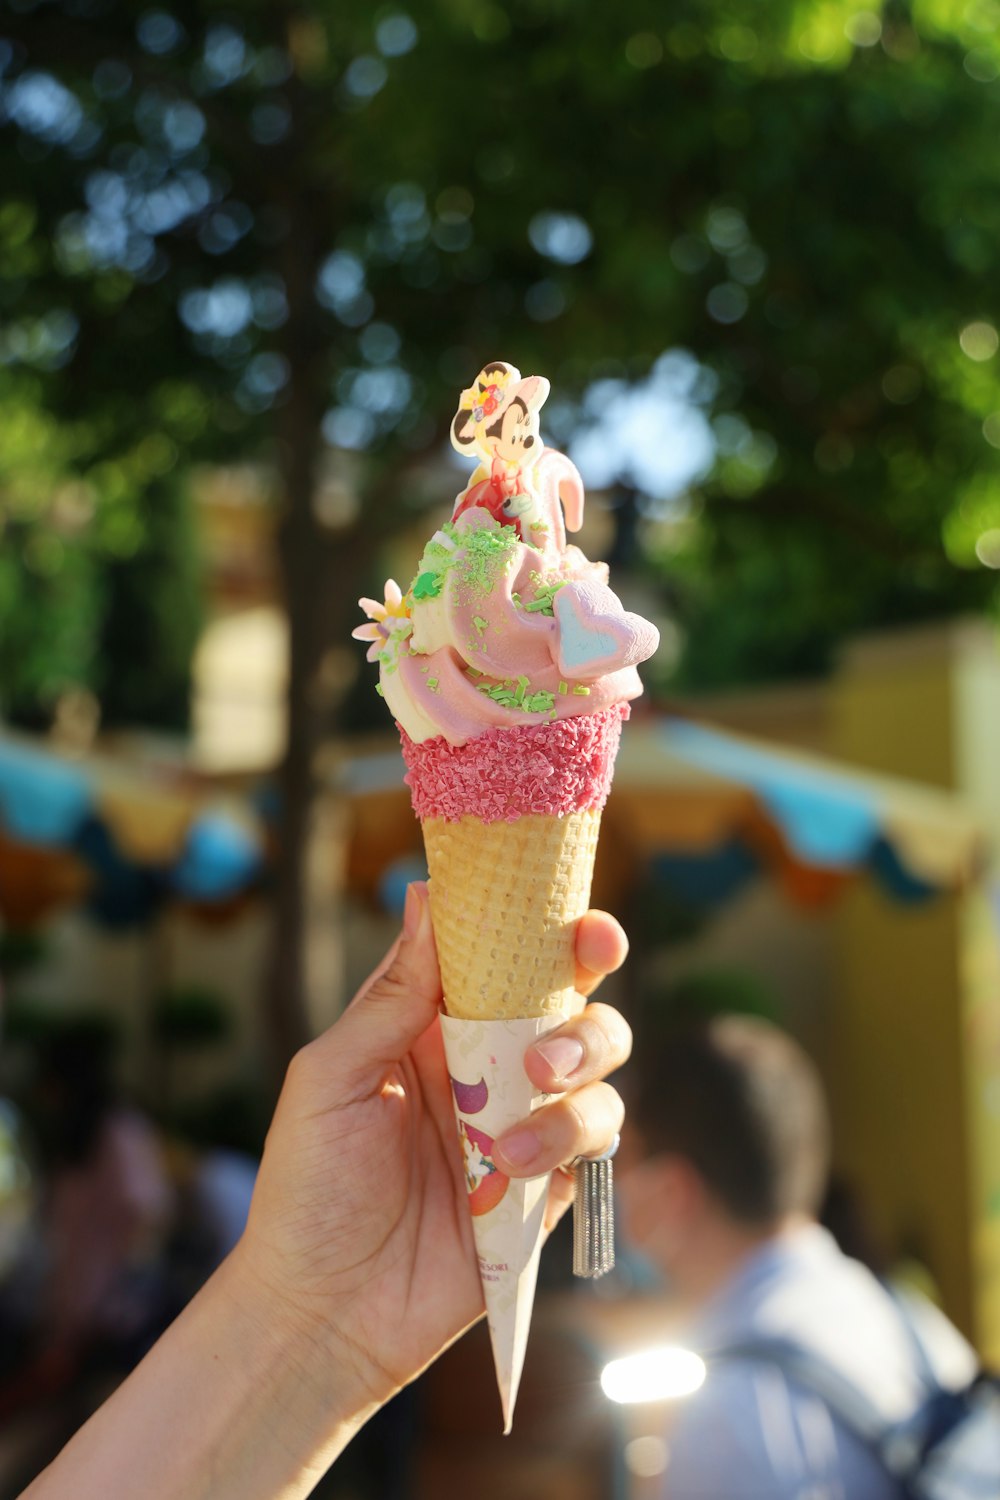 person holding ice cream cone with pink ice cream